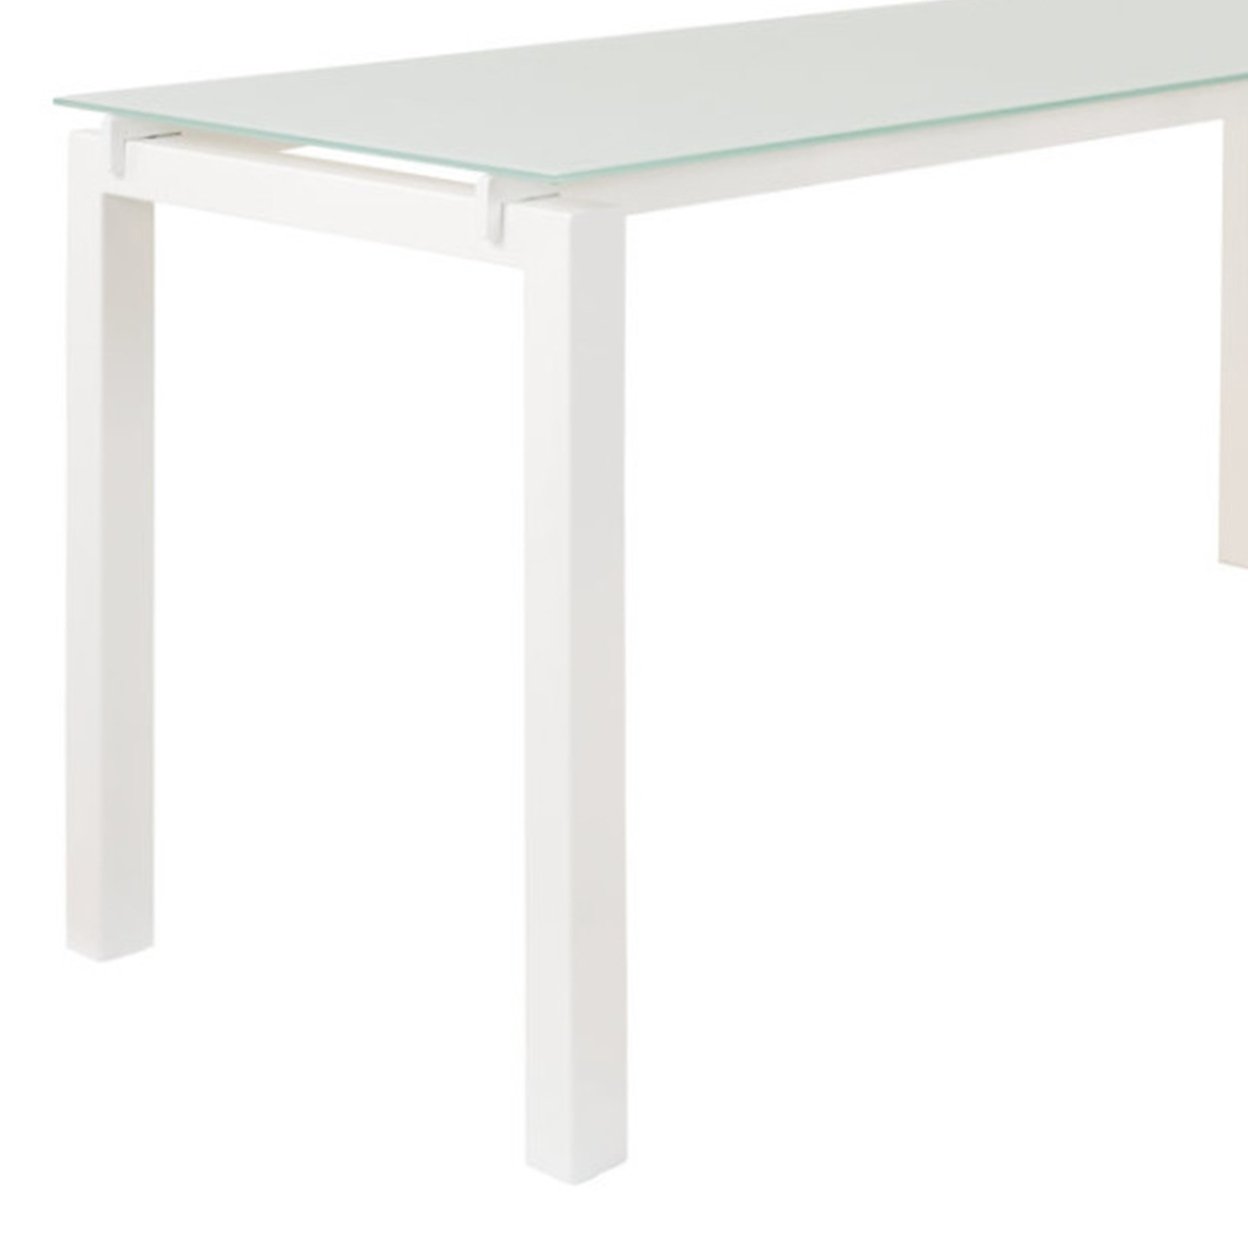 Metal L Shape Desk With Frosted Glass Top And Block Legs, White- Saltoro Sherpi